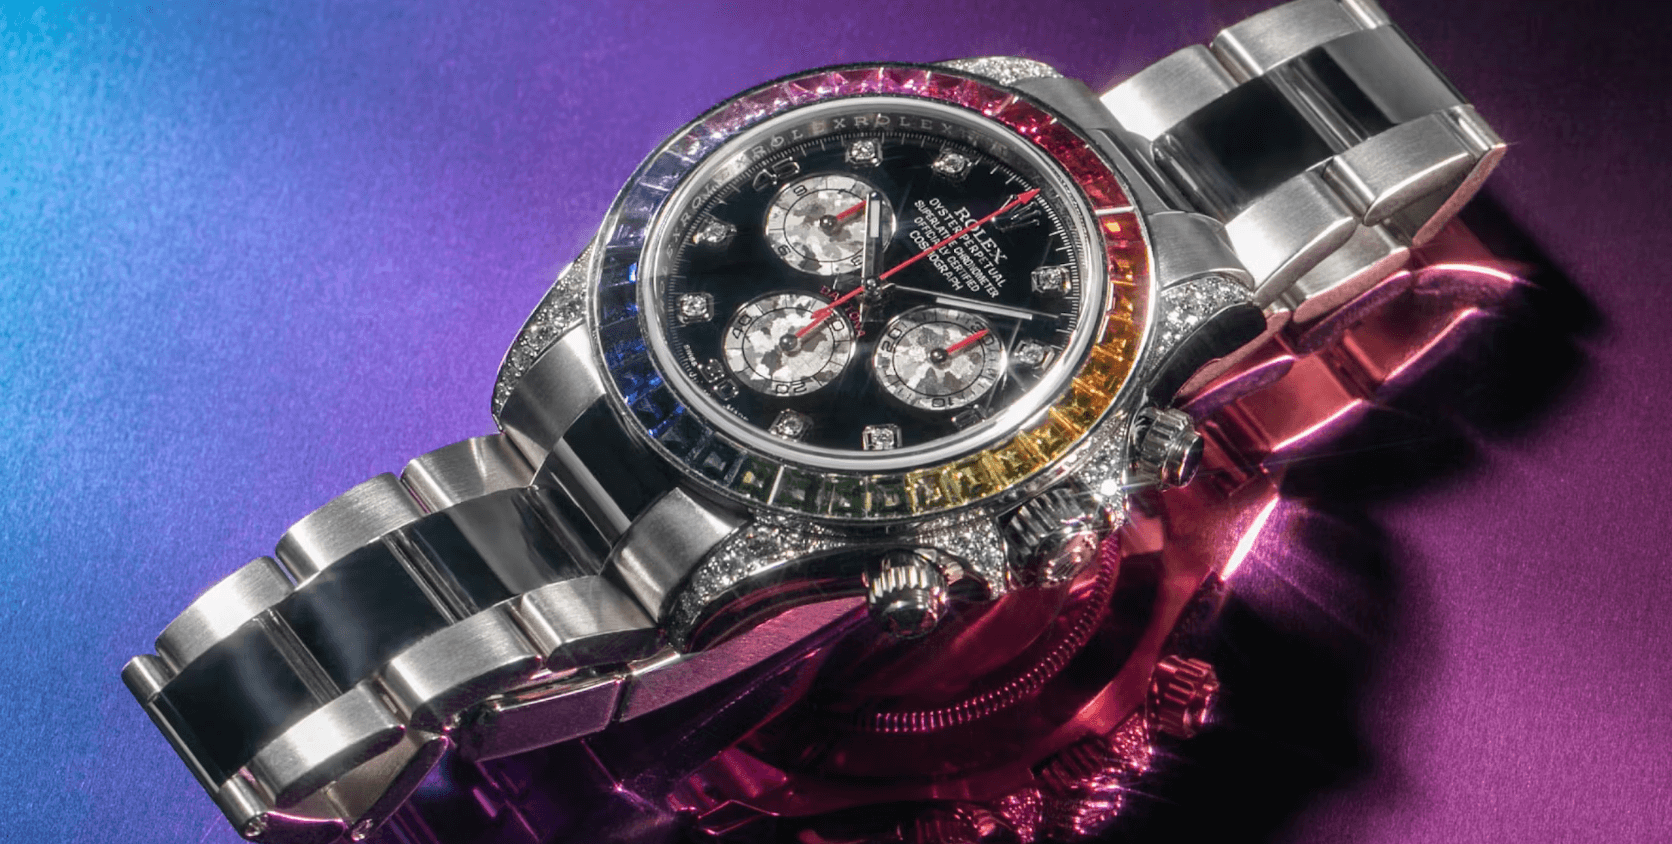 The crown jewel that stands out: the Rolex Daytona Rainbow. 